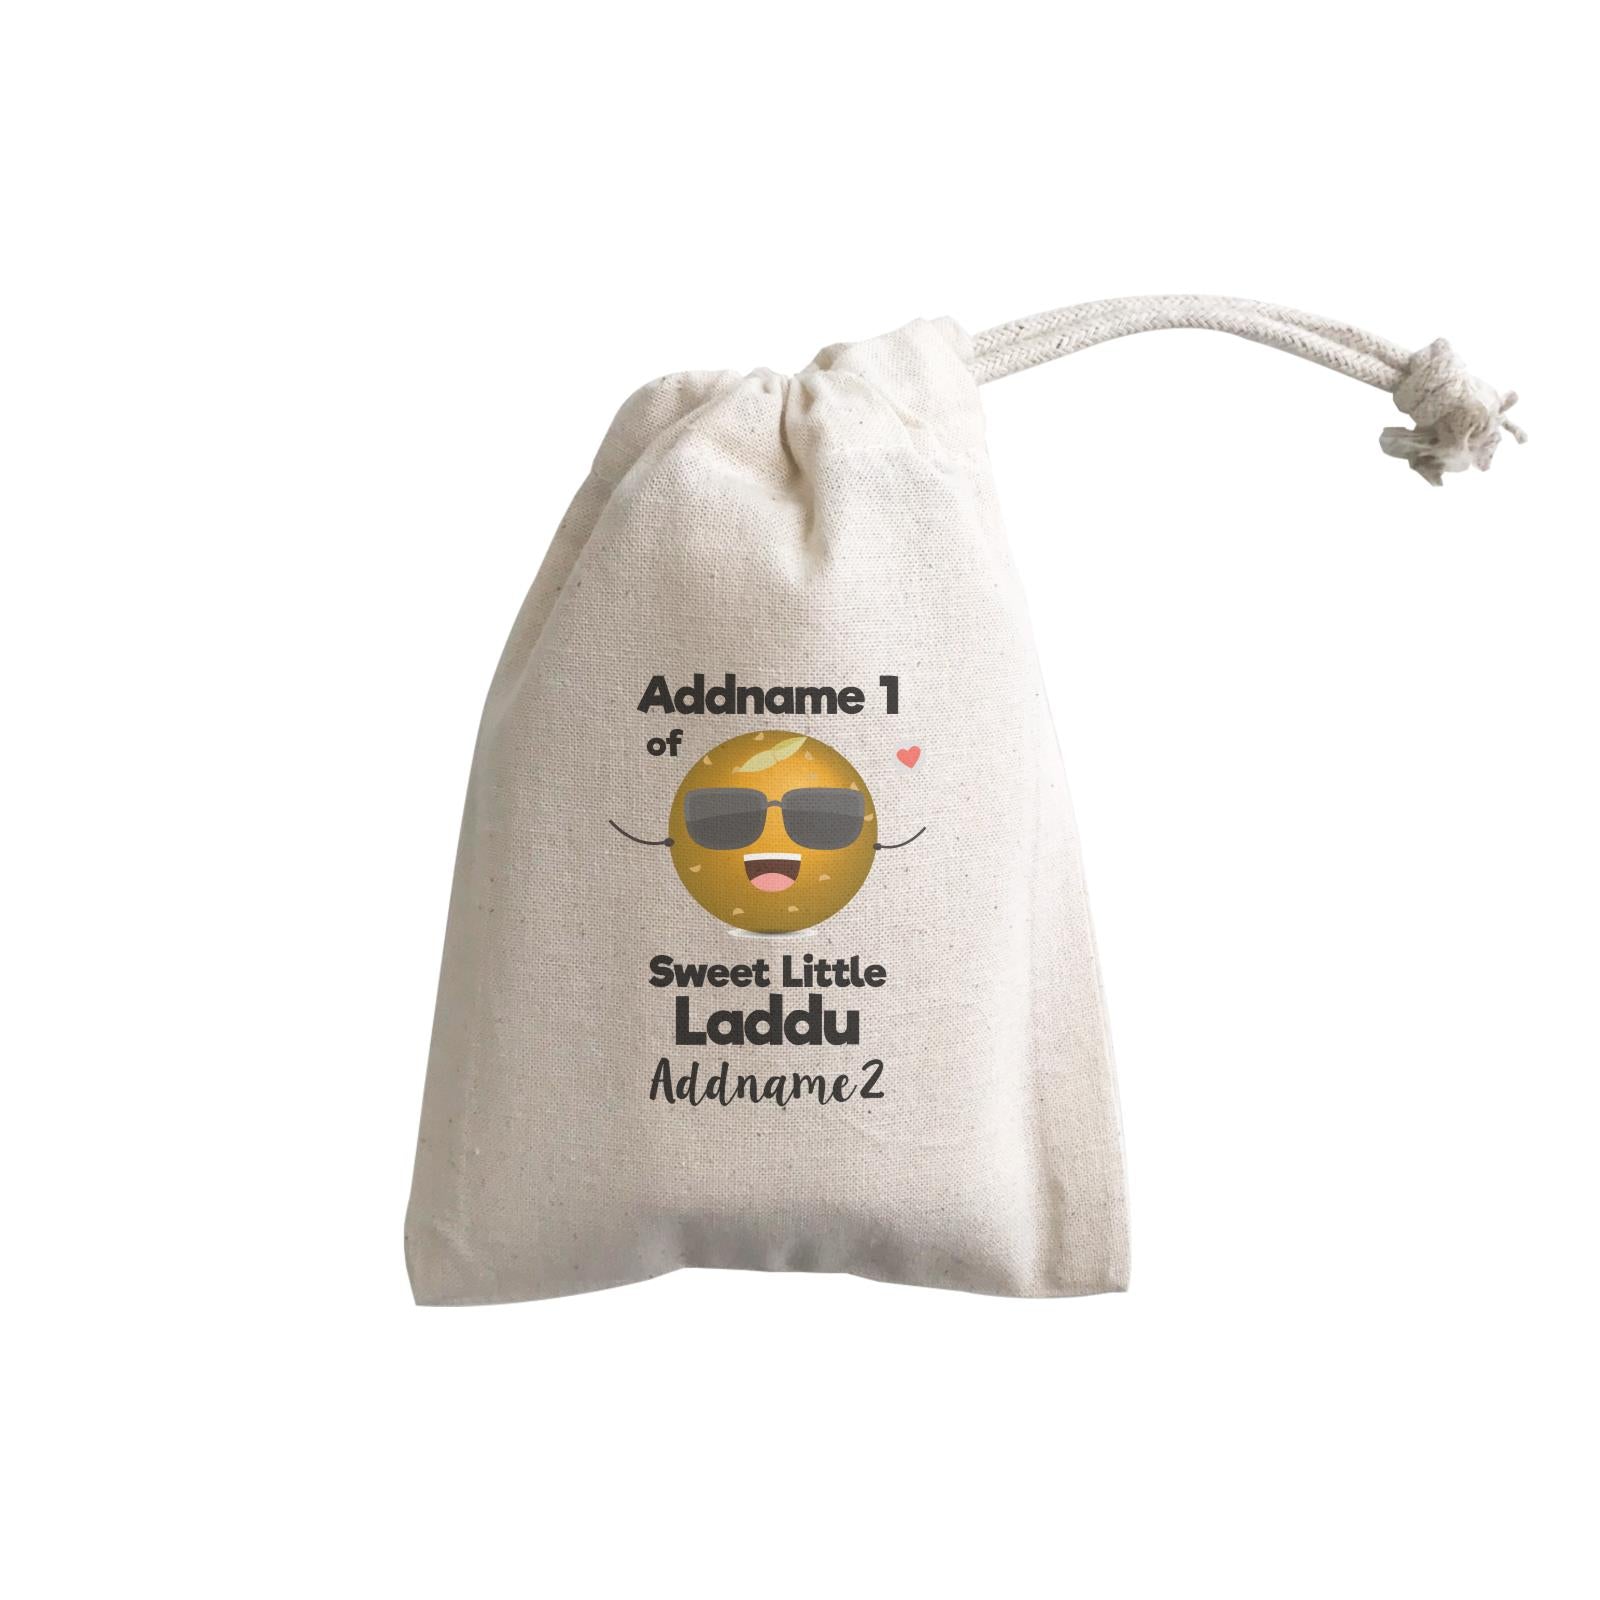 Addname 1 of Sweet Little Laddu Addname 2 GP Gift Pouch